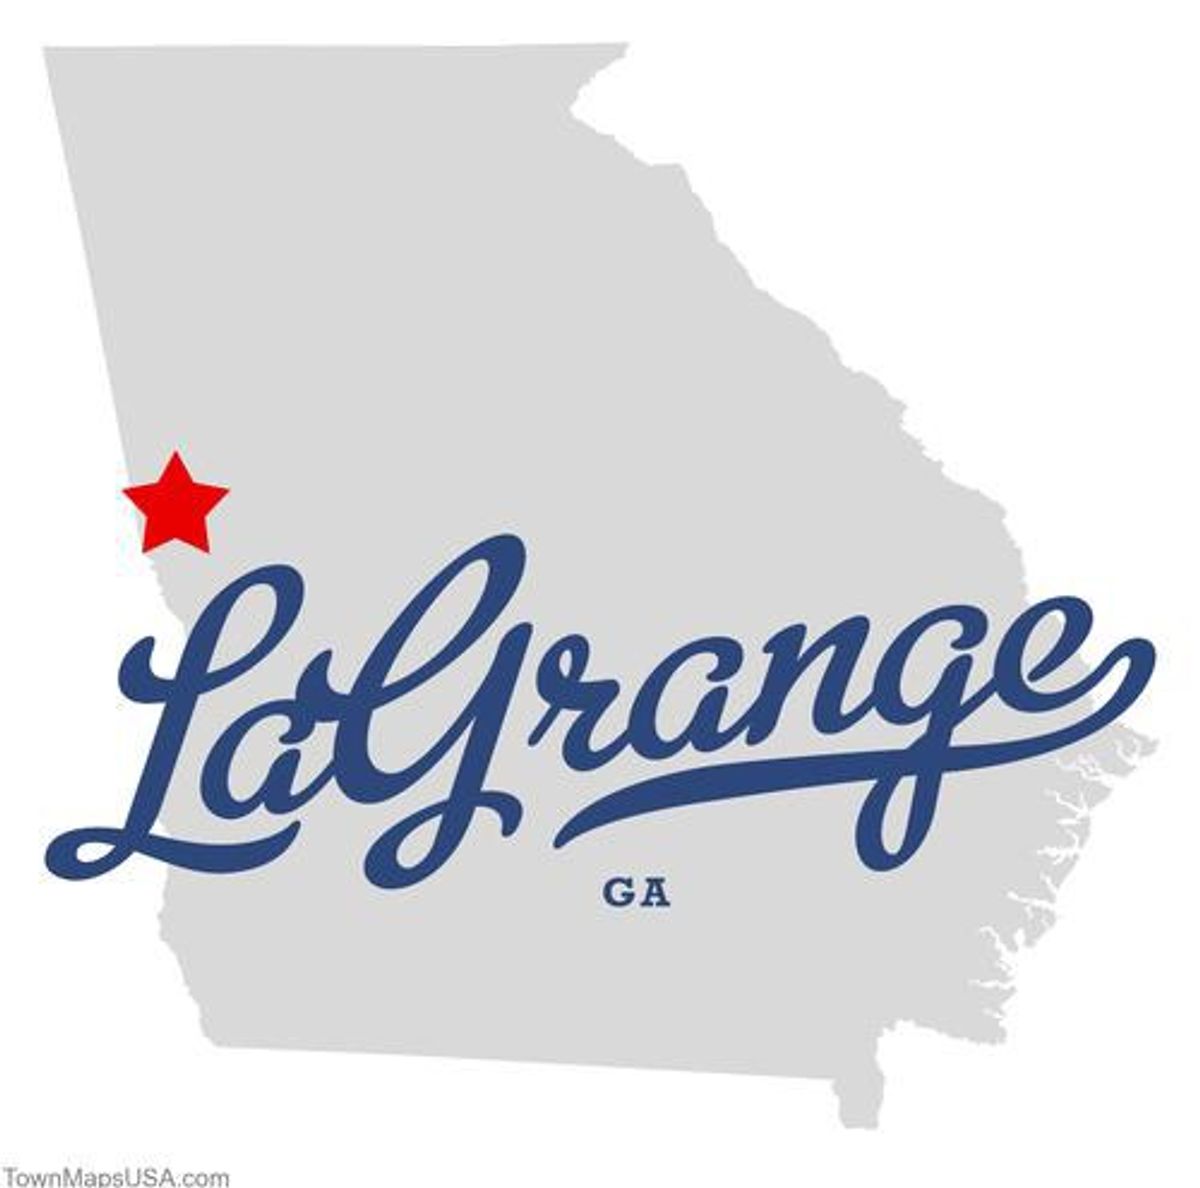 42 Reasons You Know You're From LaGrange, Georgia